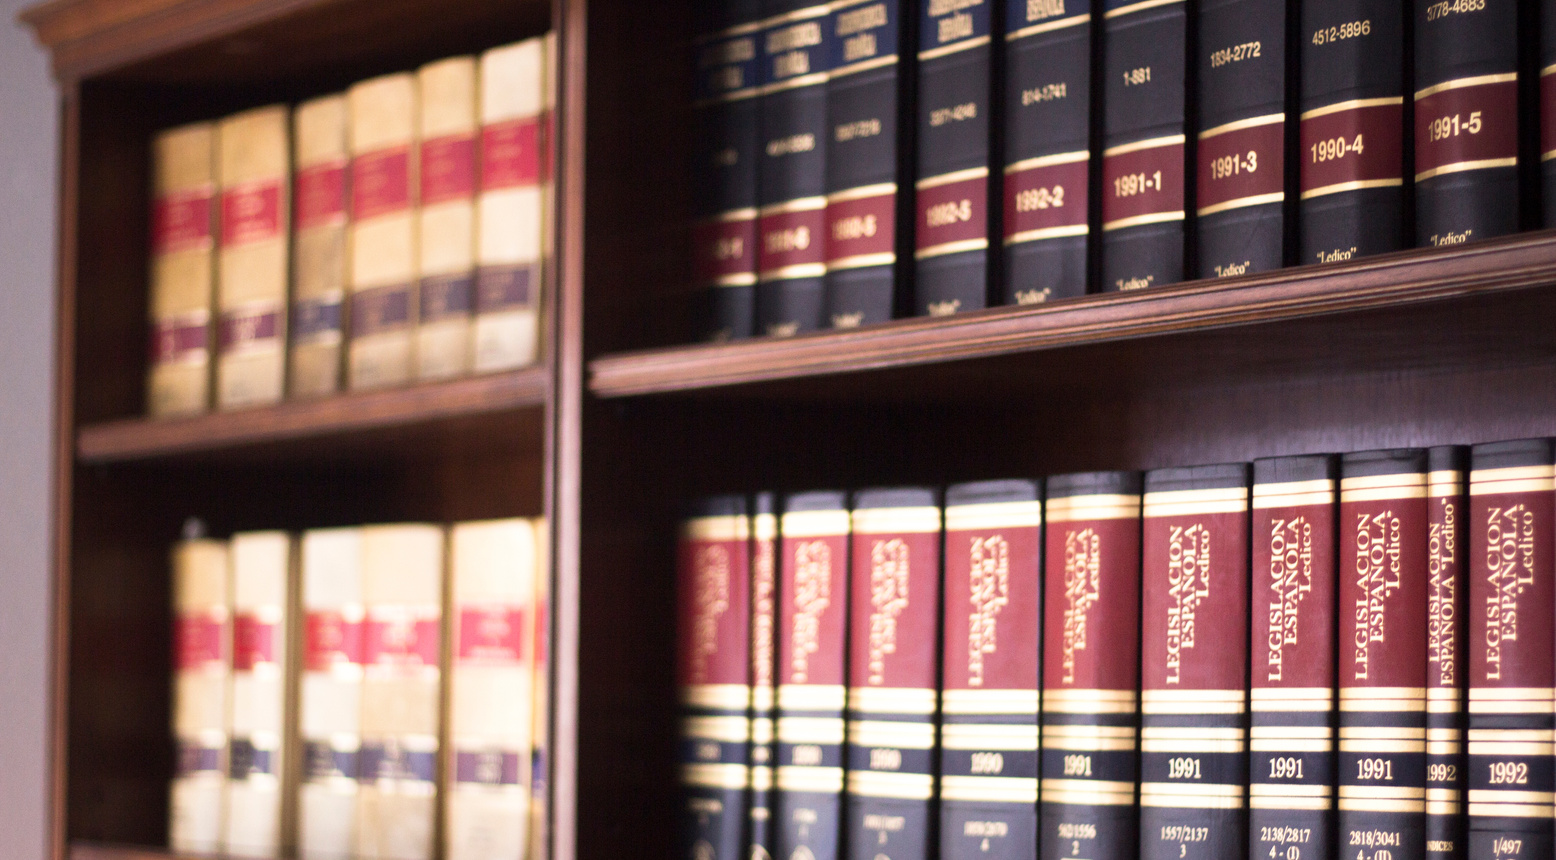 Legal Books Law Reports